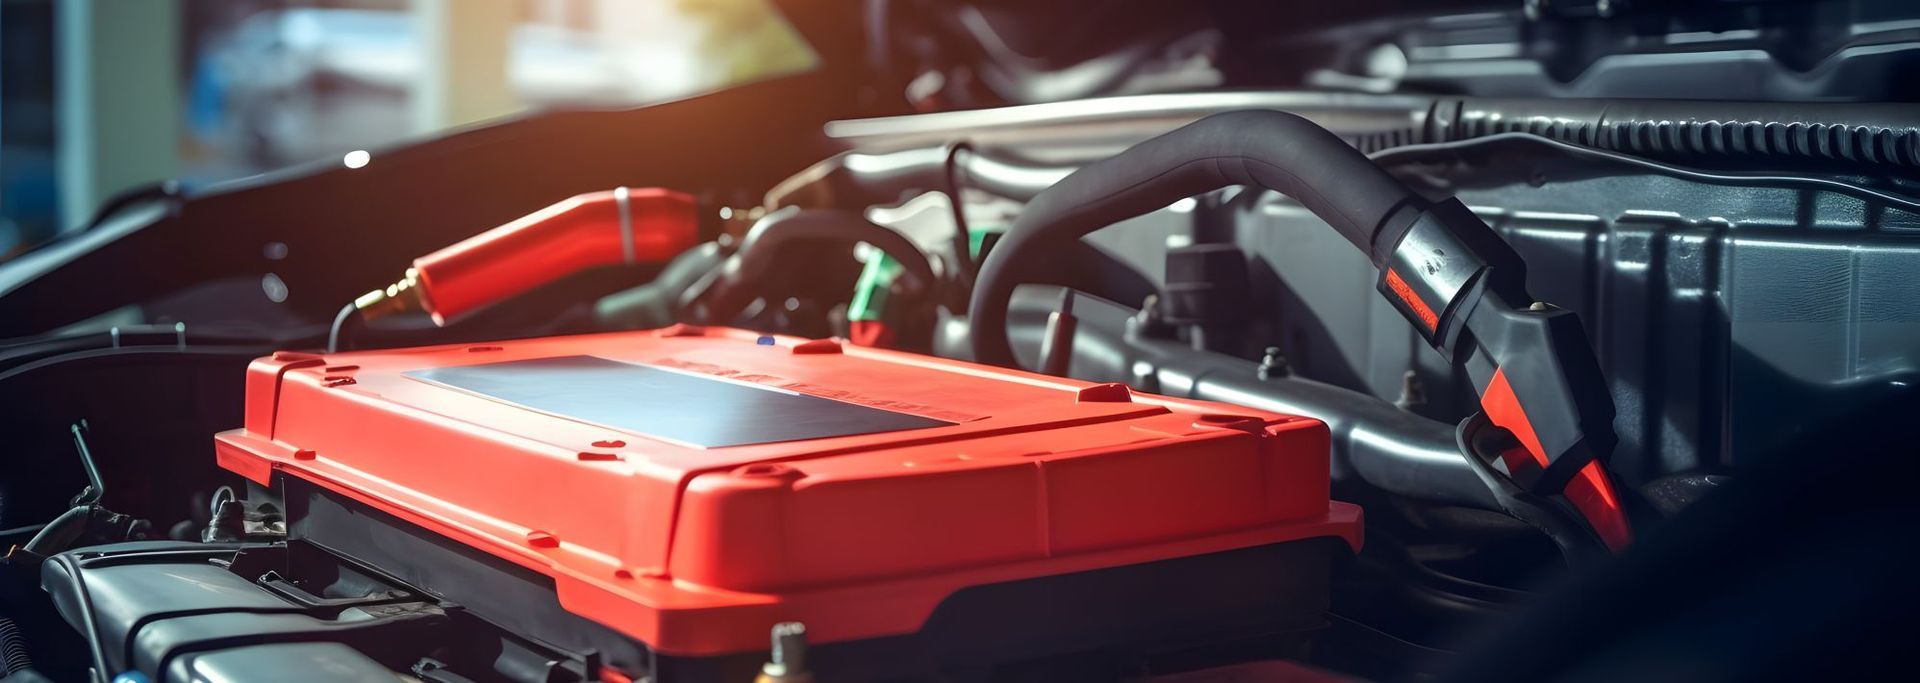 Sustainable Practices for Car Battery and Alternator Care